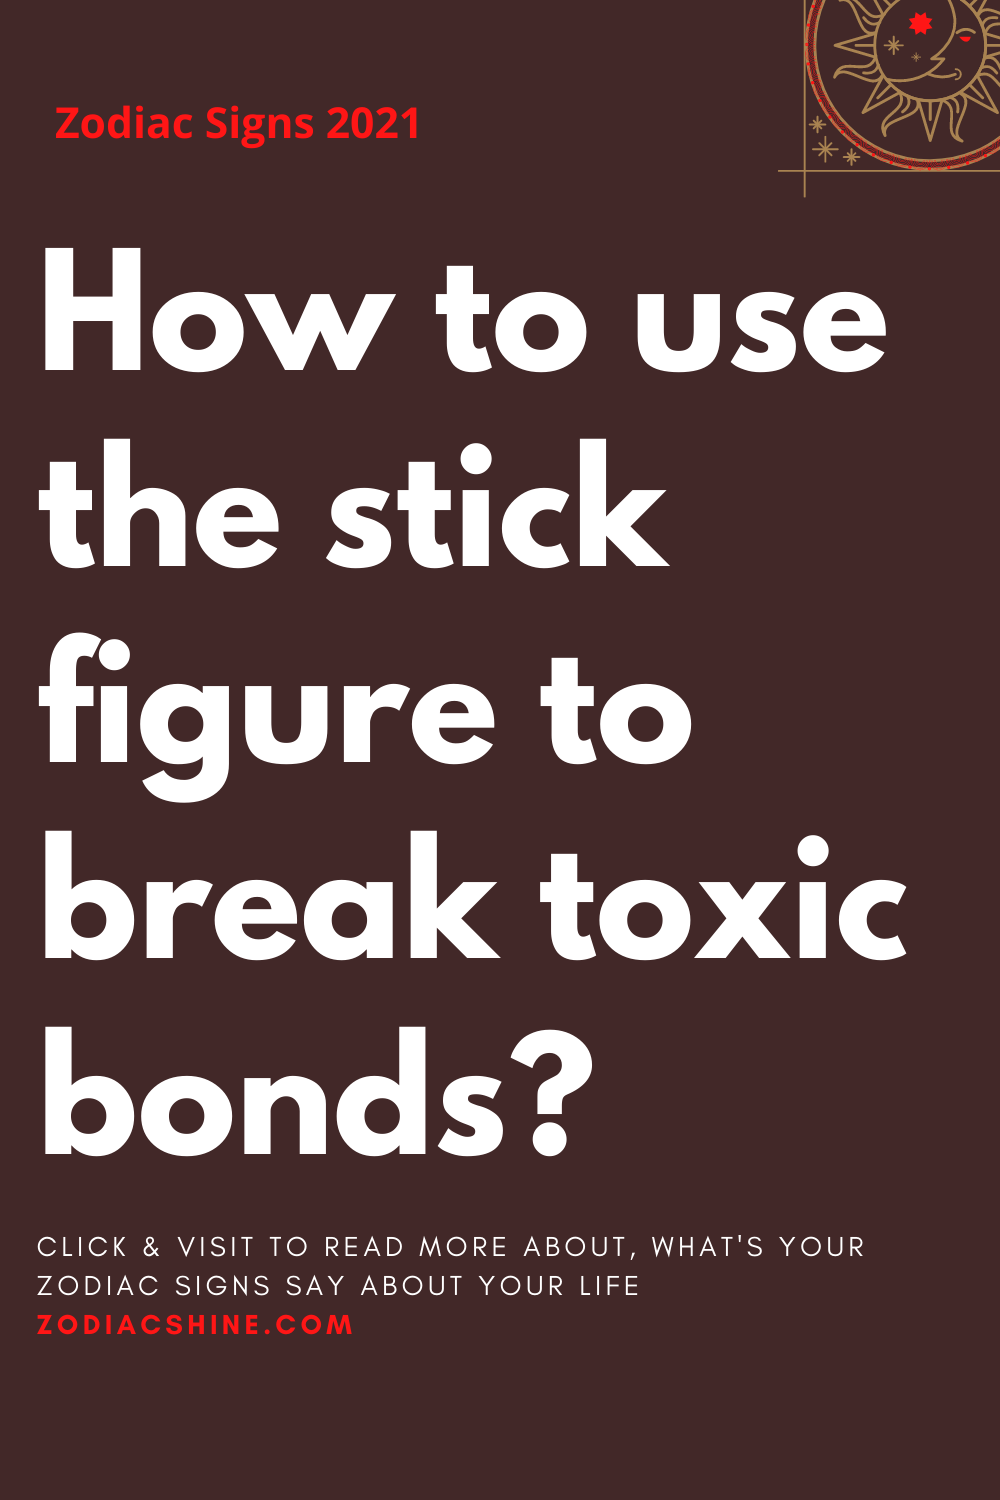 How to use the stick figure to break toxic bonds?